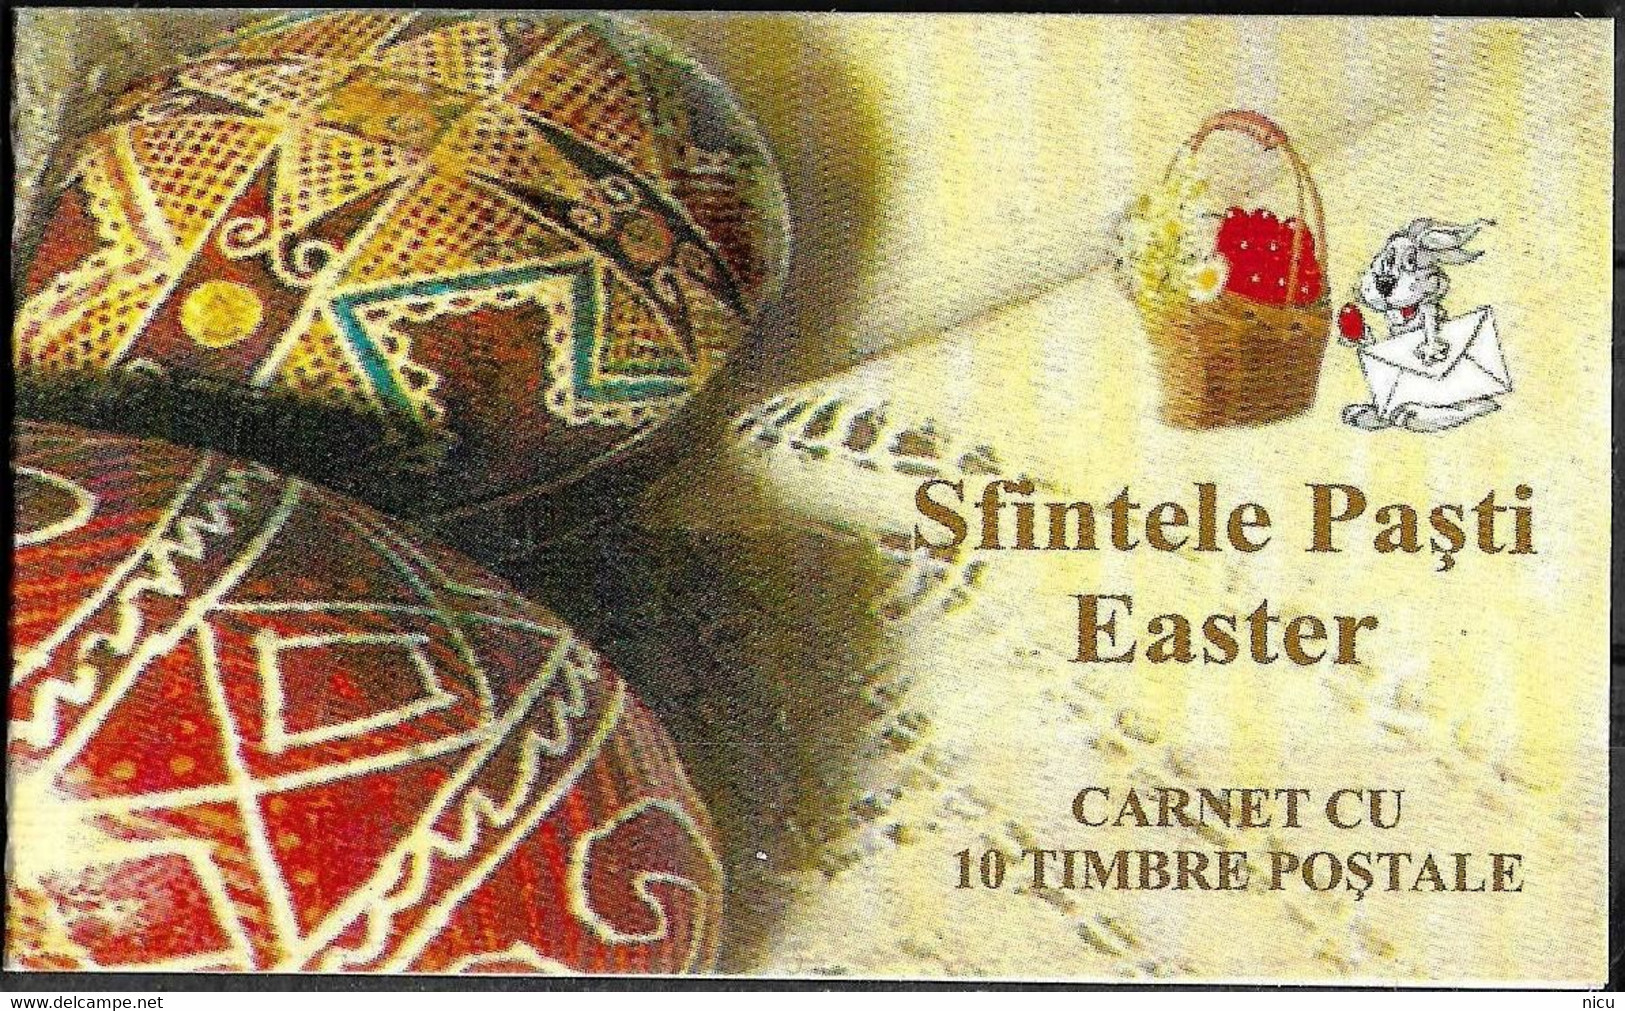 2003 - EASTER - BOOKLET OF 10 STAMPS - Carnets